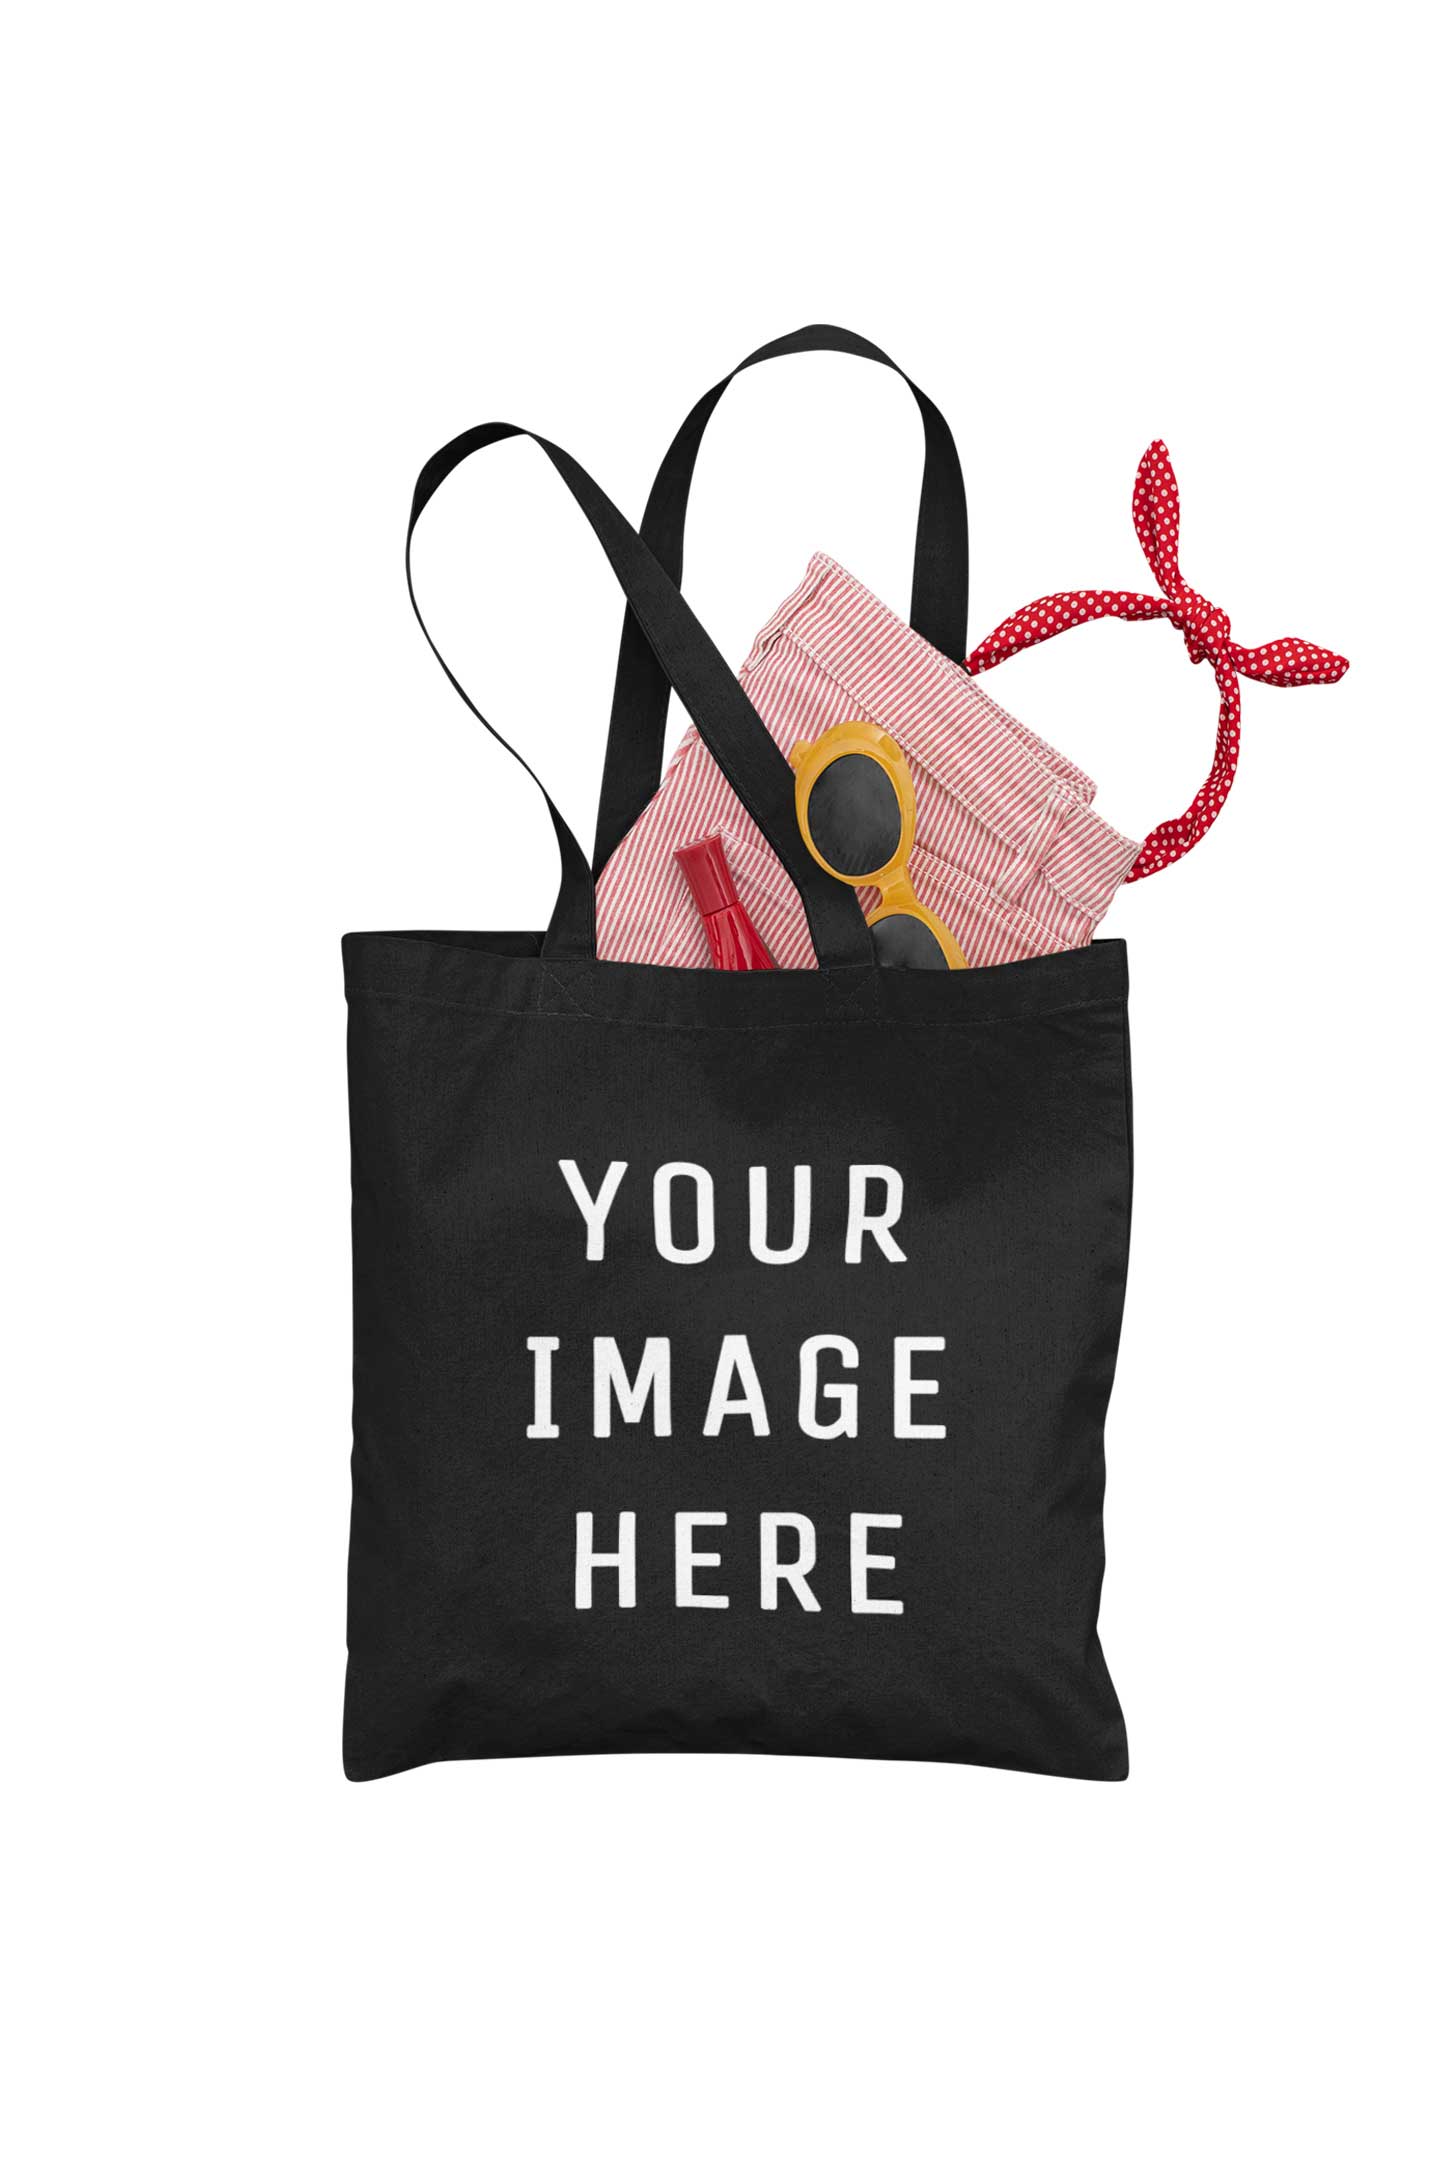 CUSTOMIZED TOTE BAG